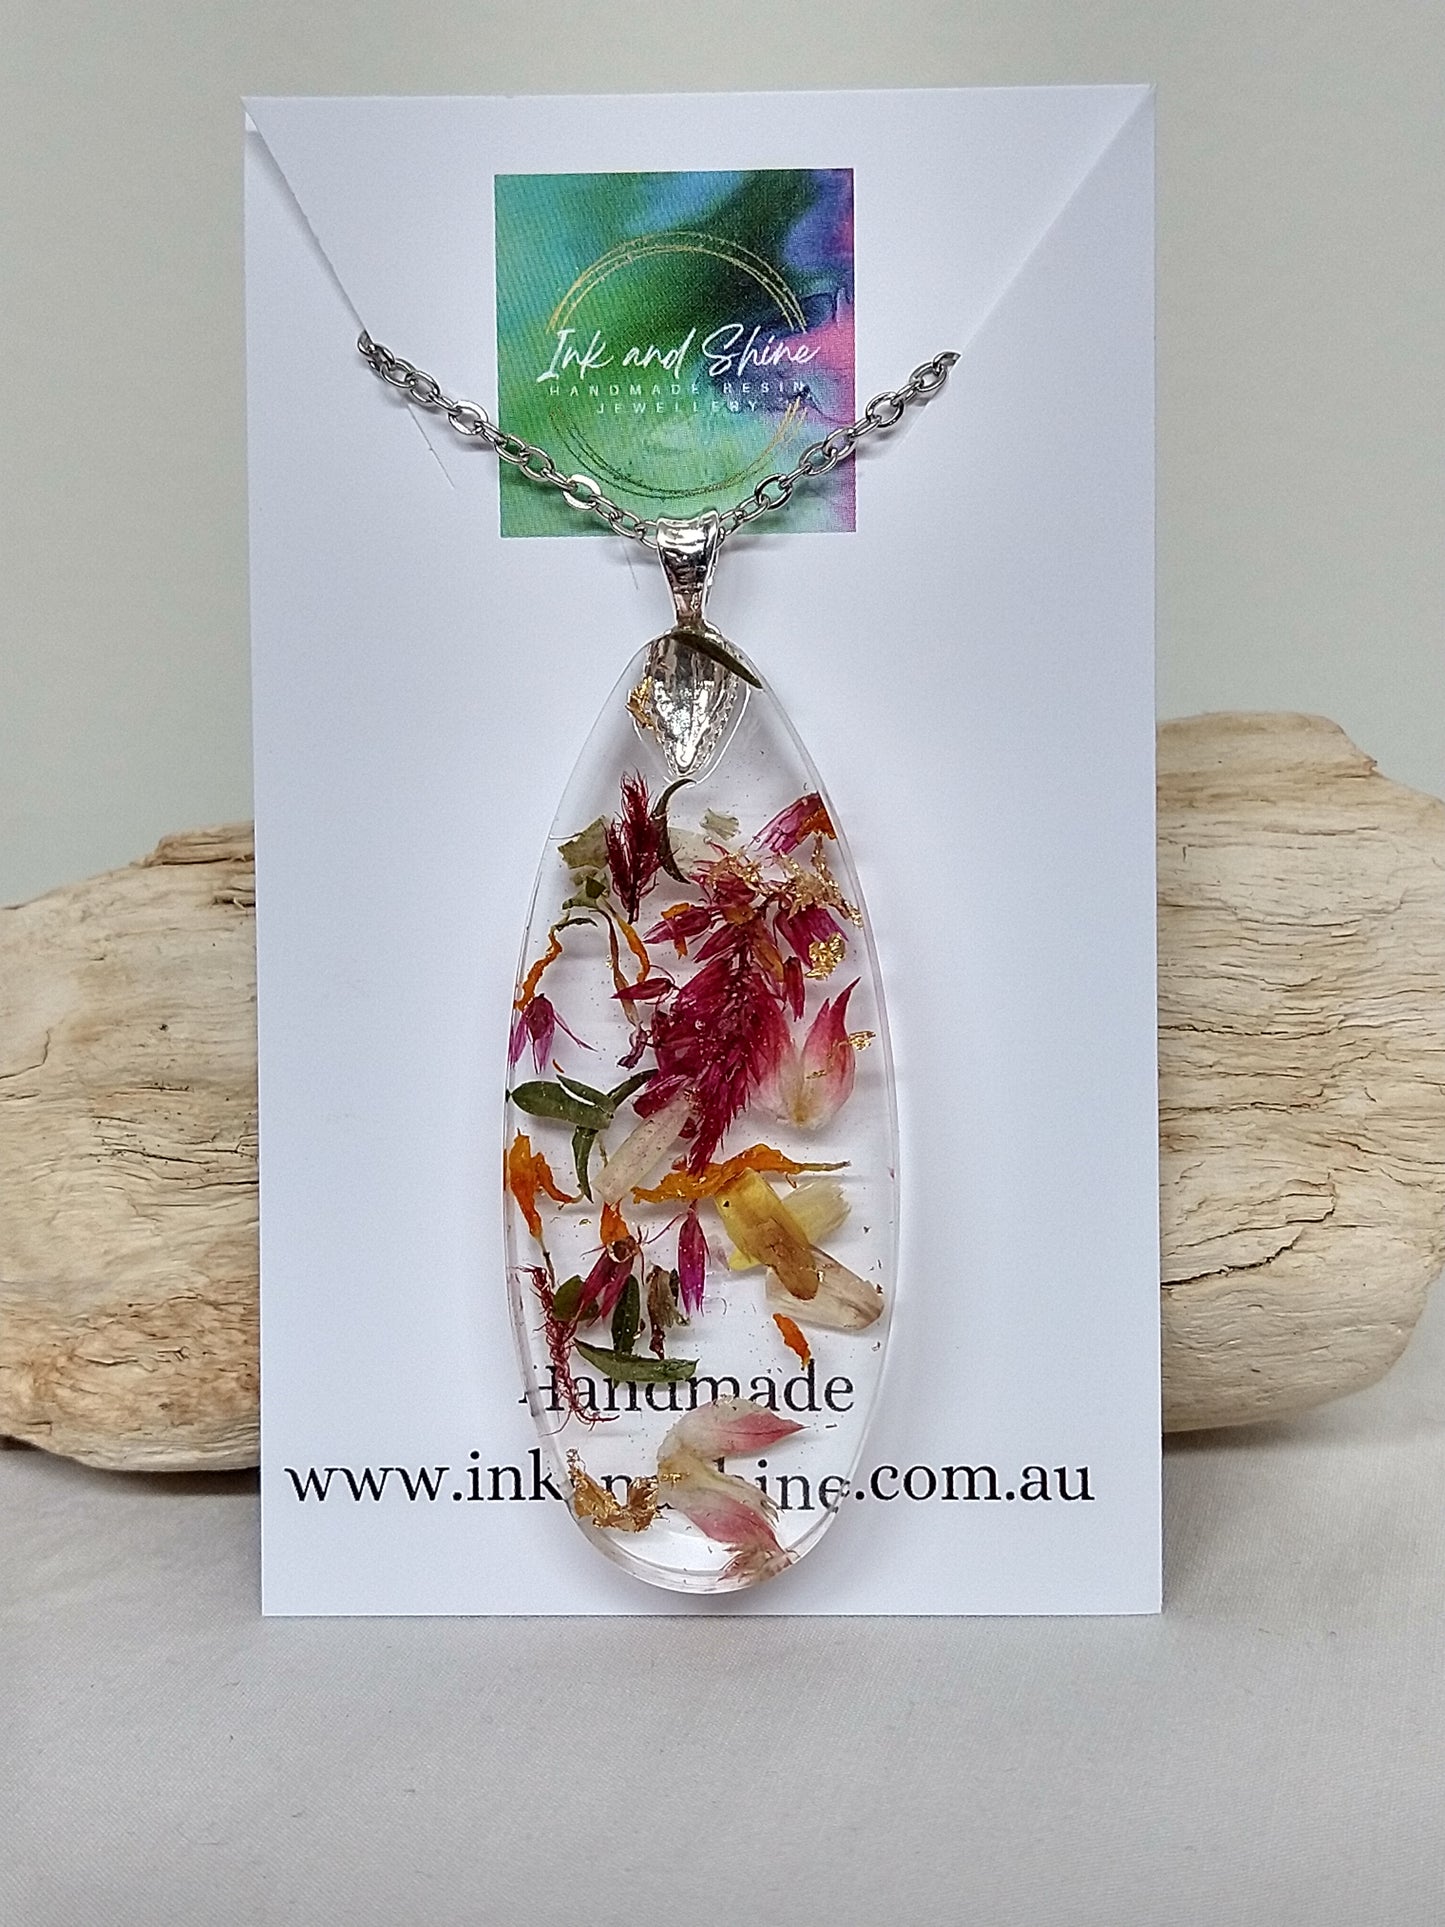 Ellipse shaped clear resin pendant necklace filled with organic dried flowers 